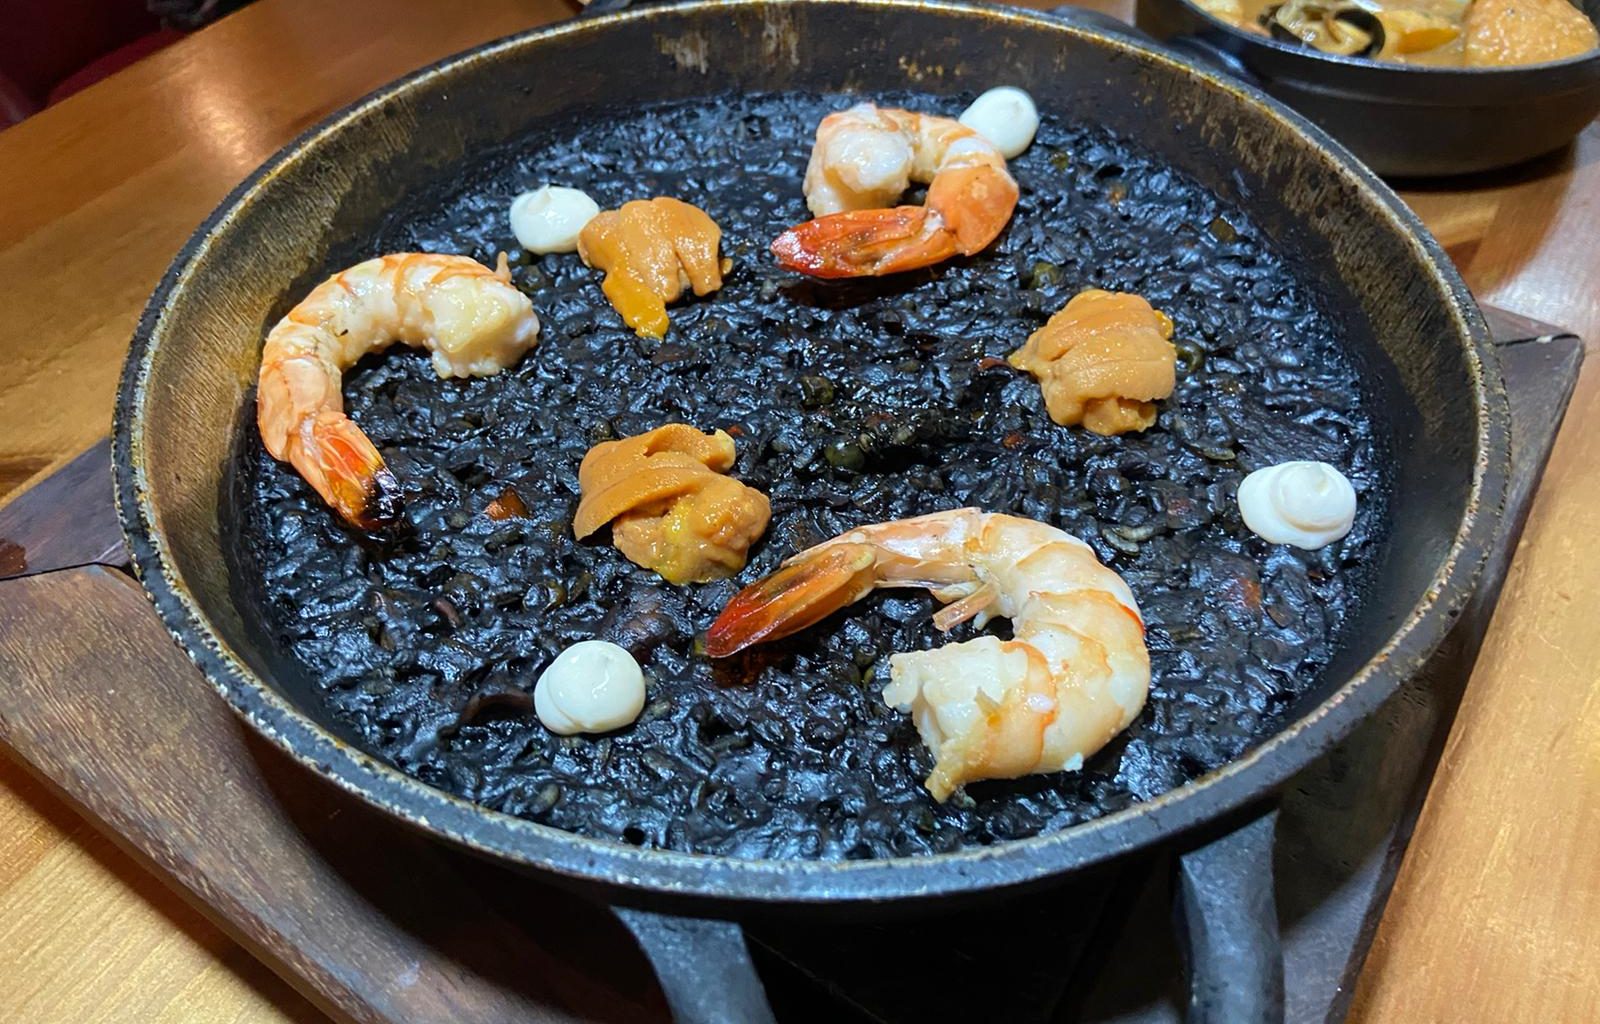 [Review] Experience Spanish Food with Uni and more with Pura Brasa's latest seasonal Seafood menu - Alvinology